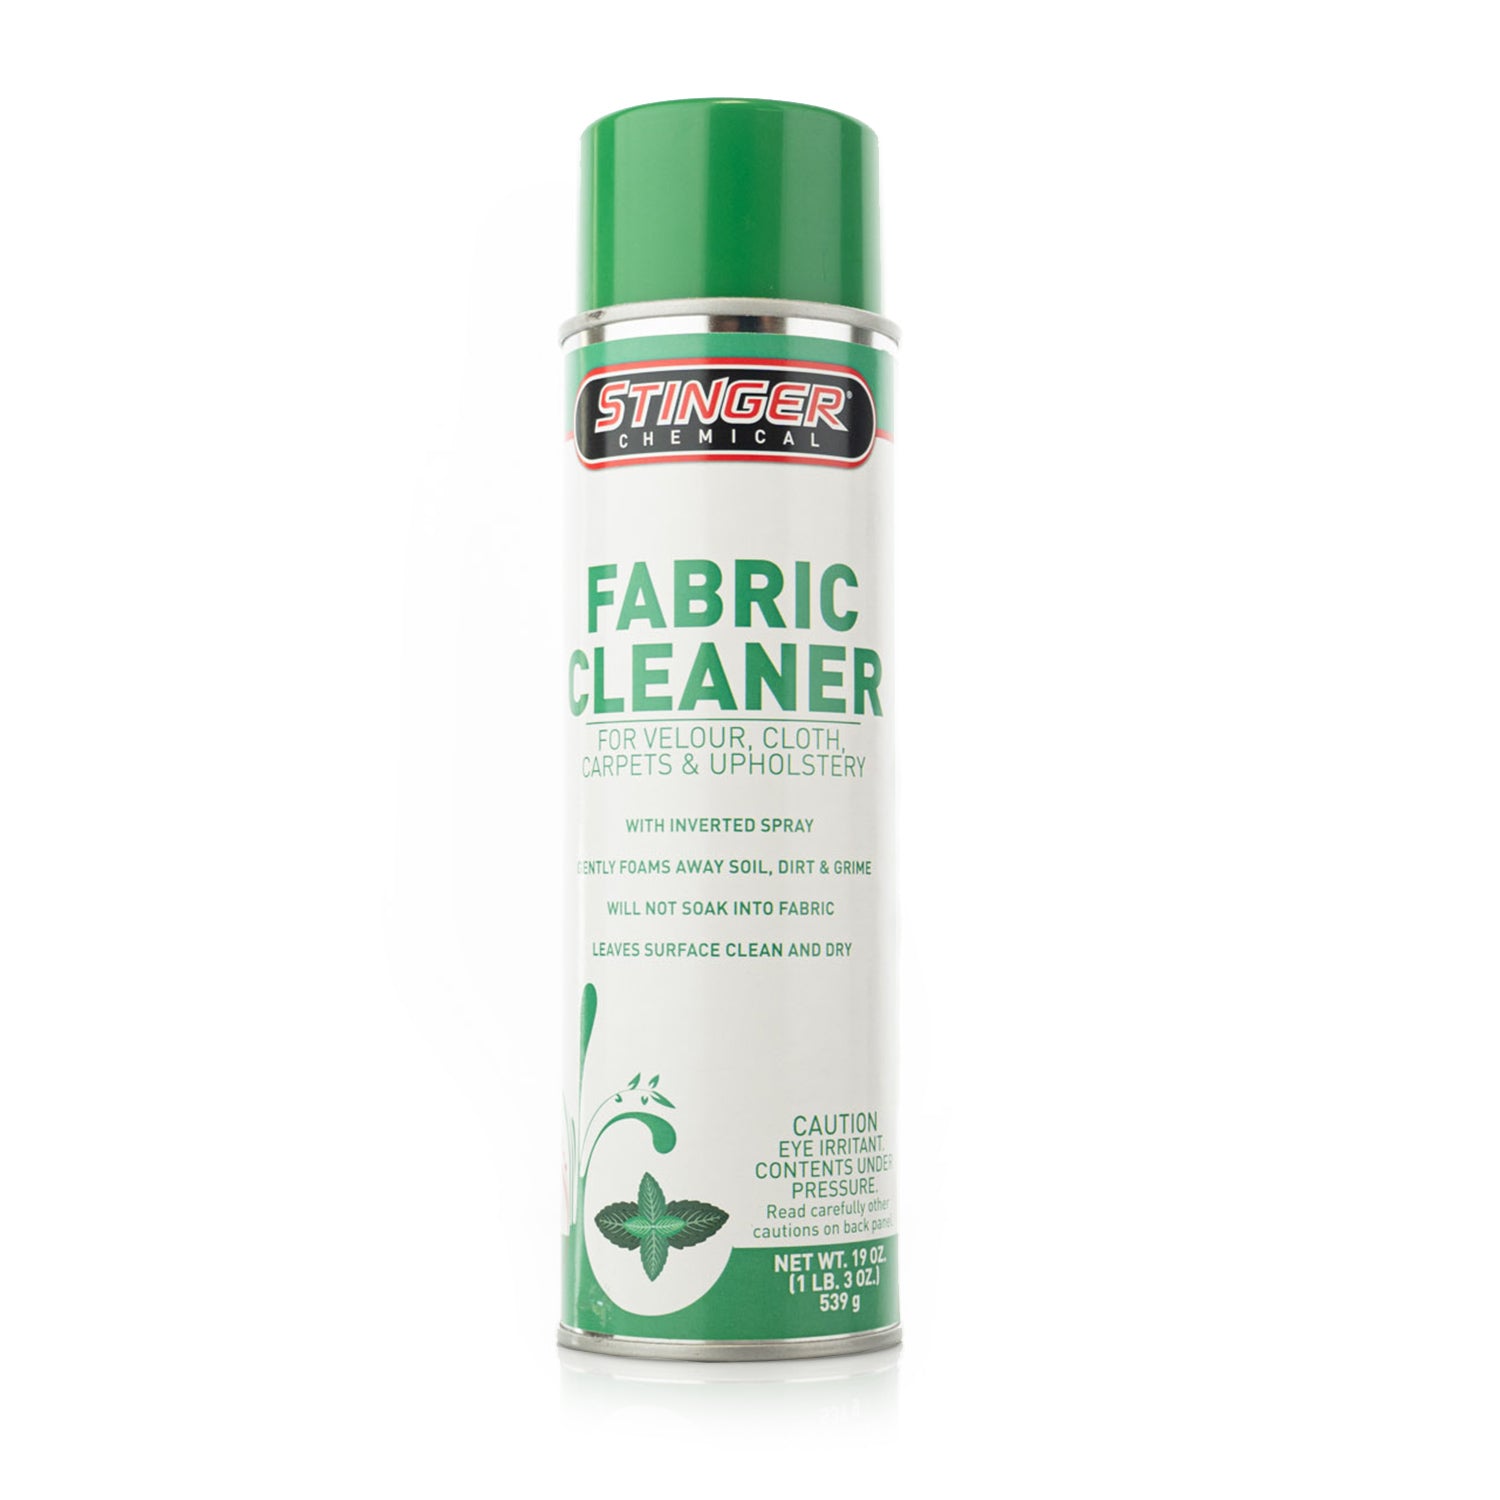 Stinger Chemical Fabric Cleaner